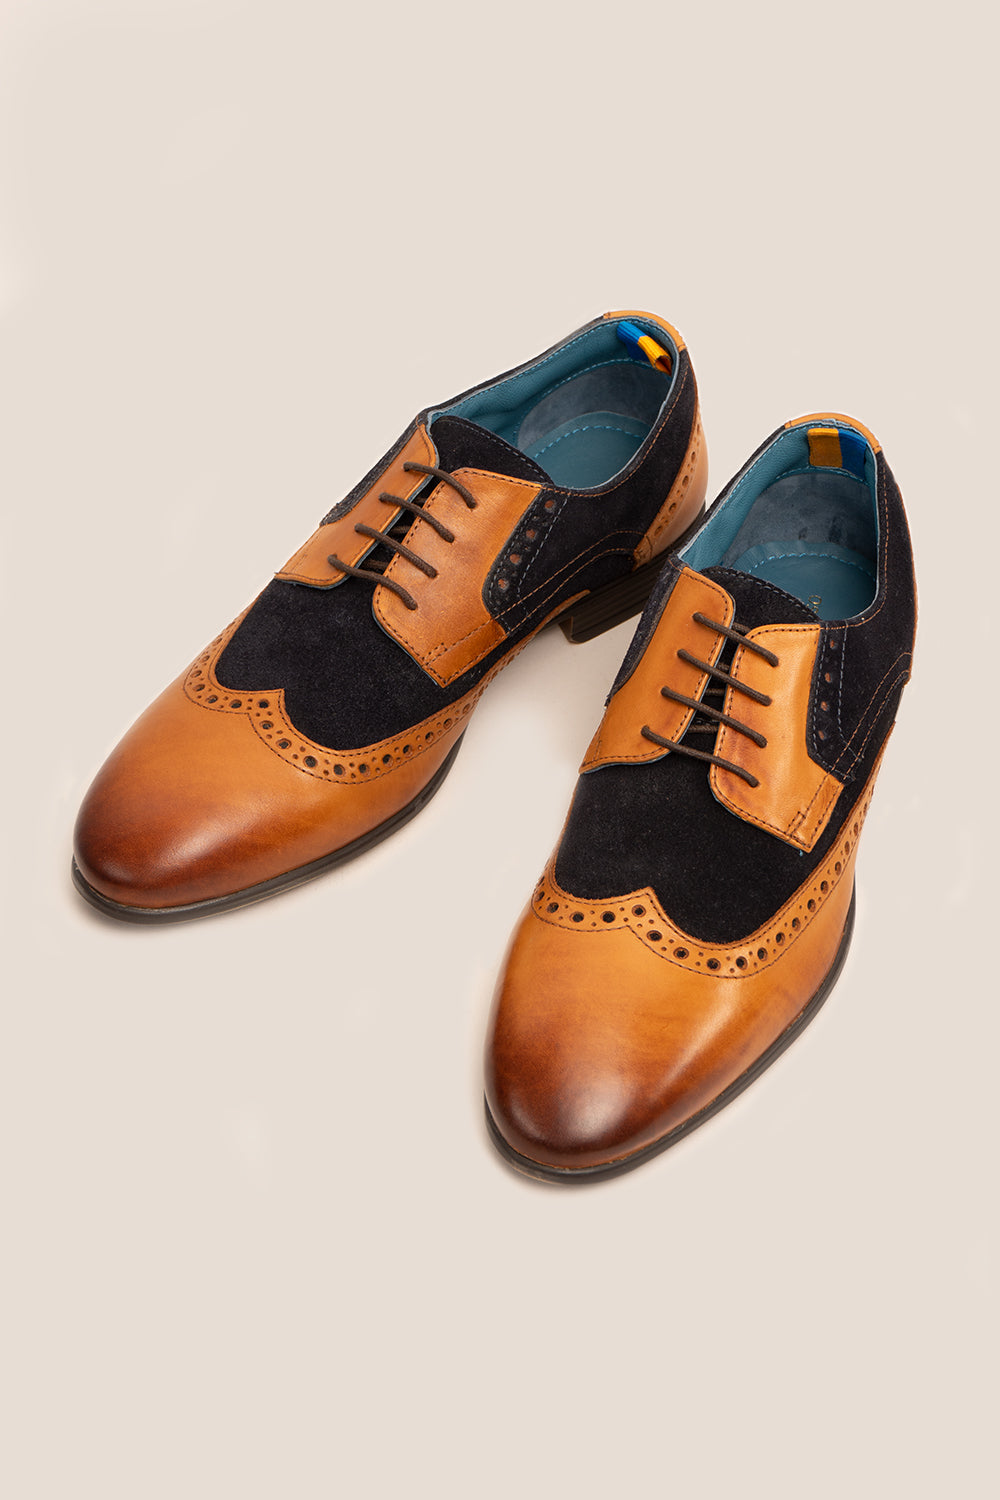 Miles Tan/Navy Leather/Suede Brogue Shoes Oswin Hyde